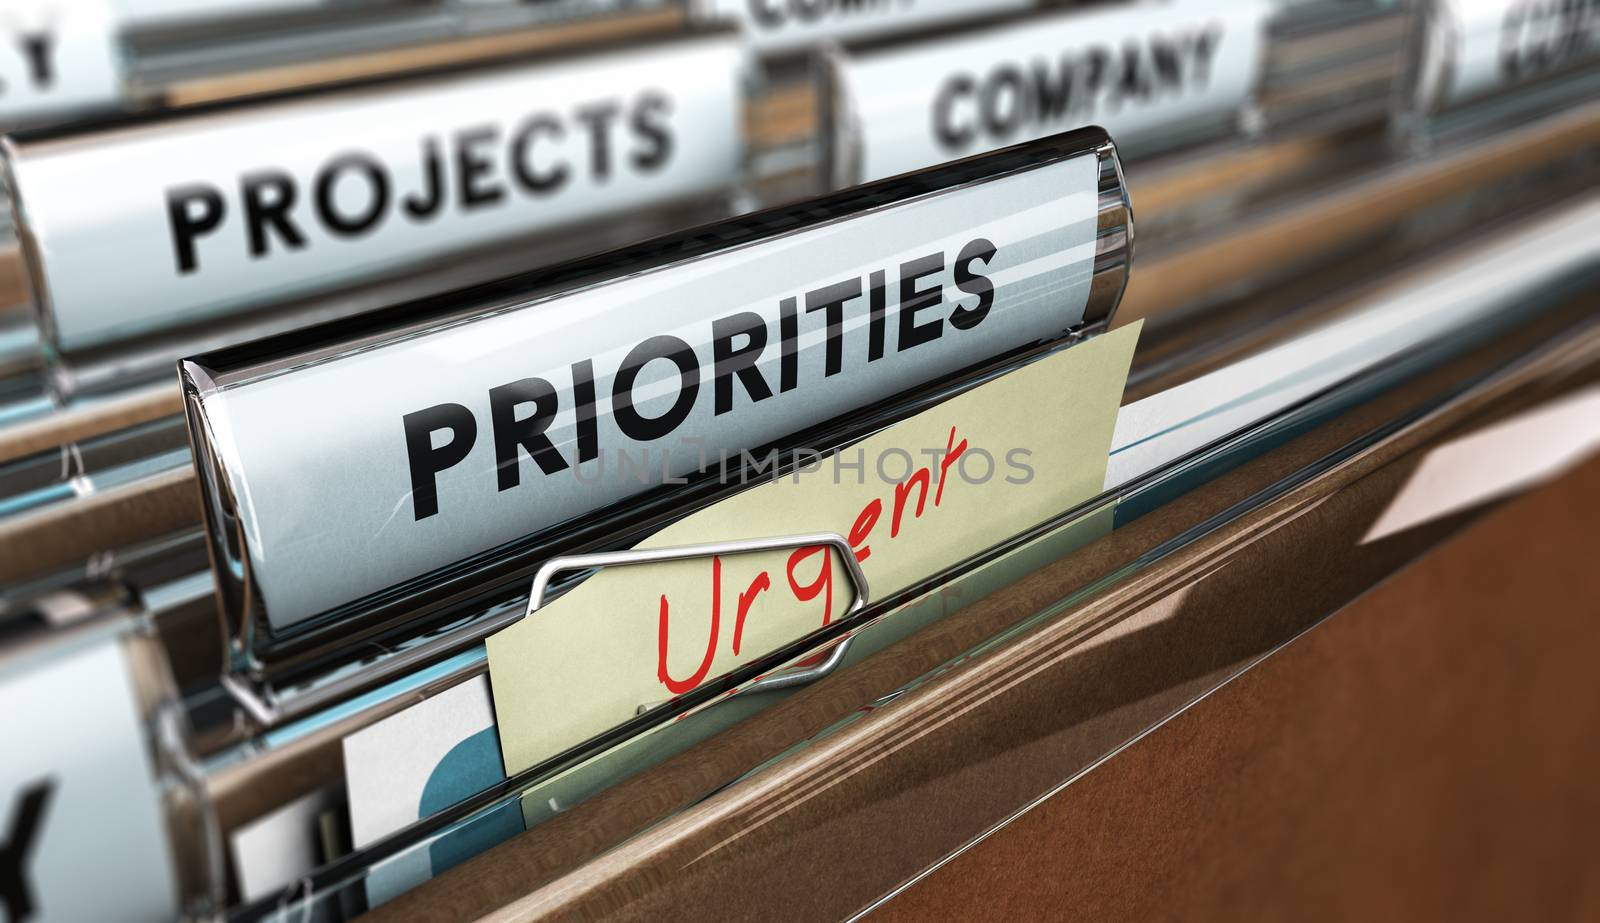 Set Priorities by Olivier-Le-Moal